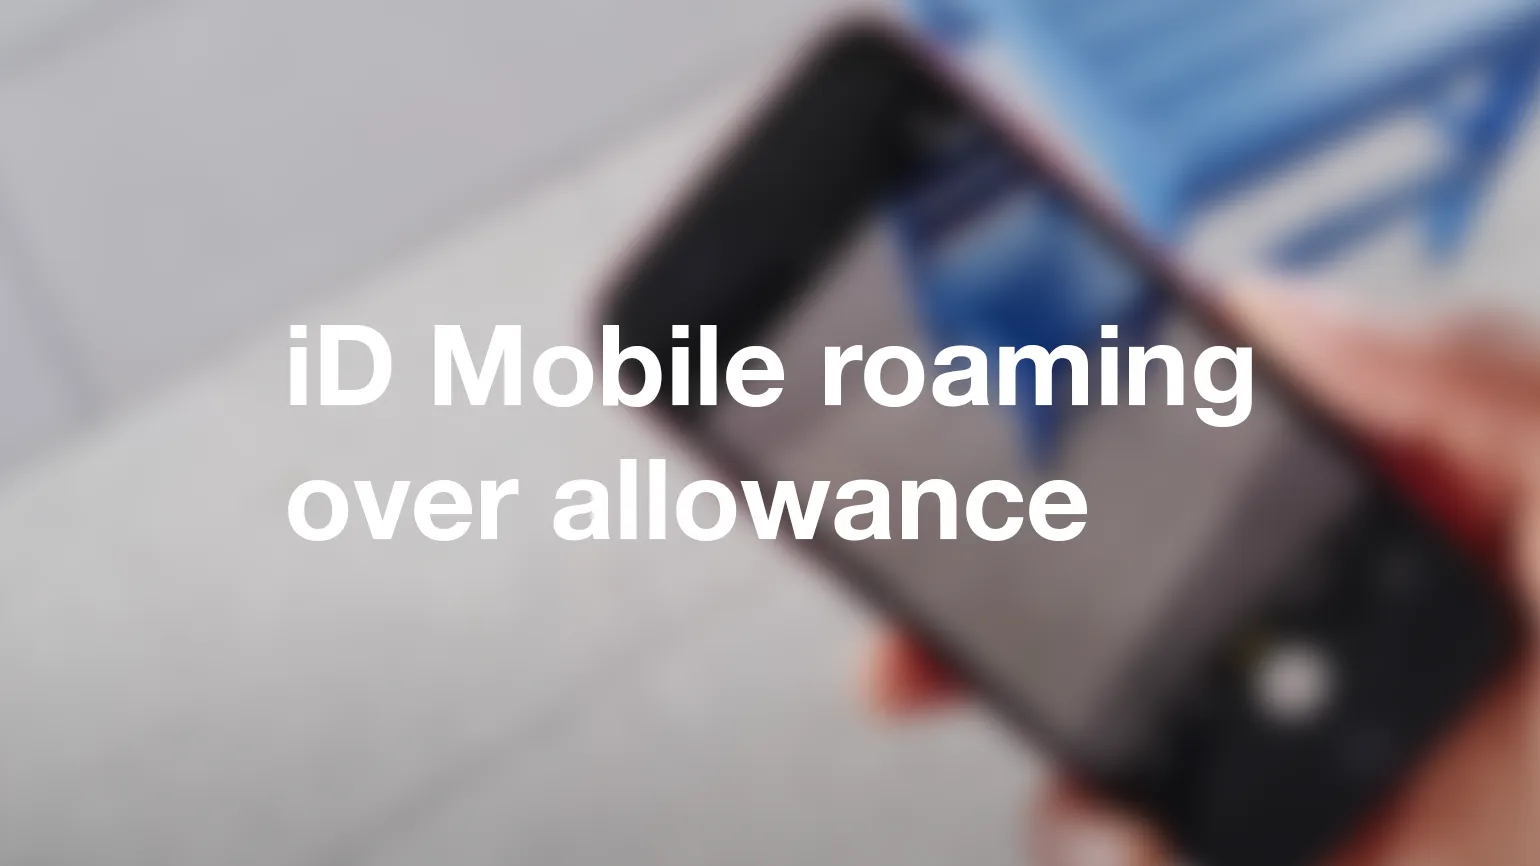 Will I be charged if I exceed my allowance when roaming with iD Mobile?